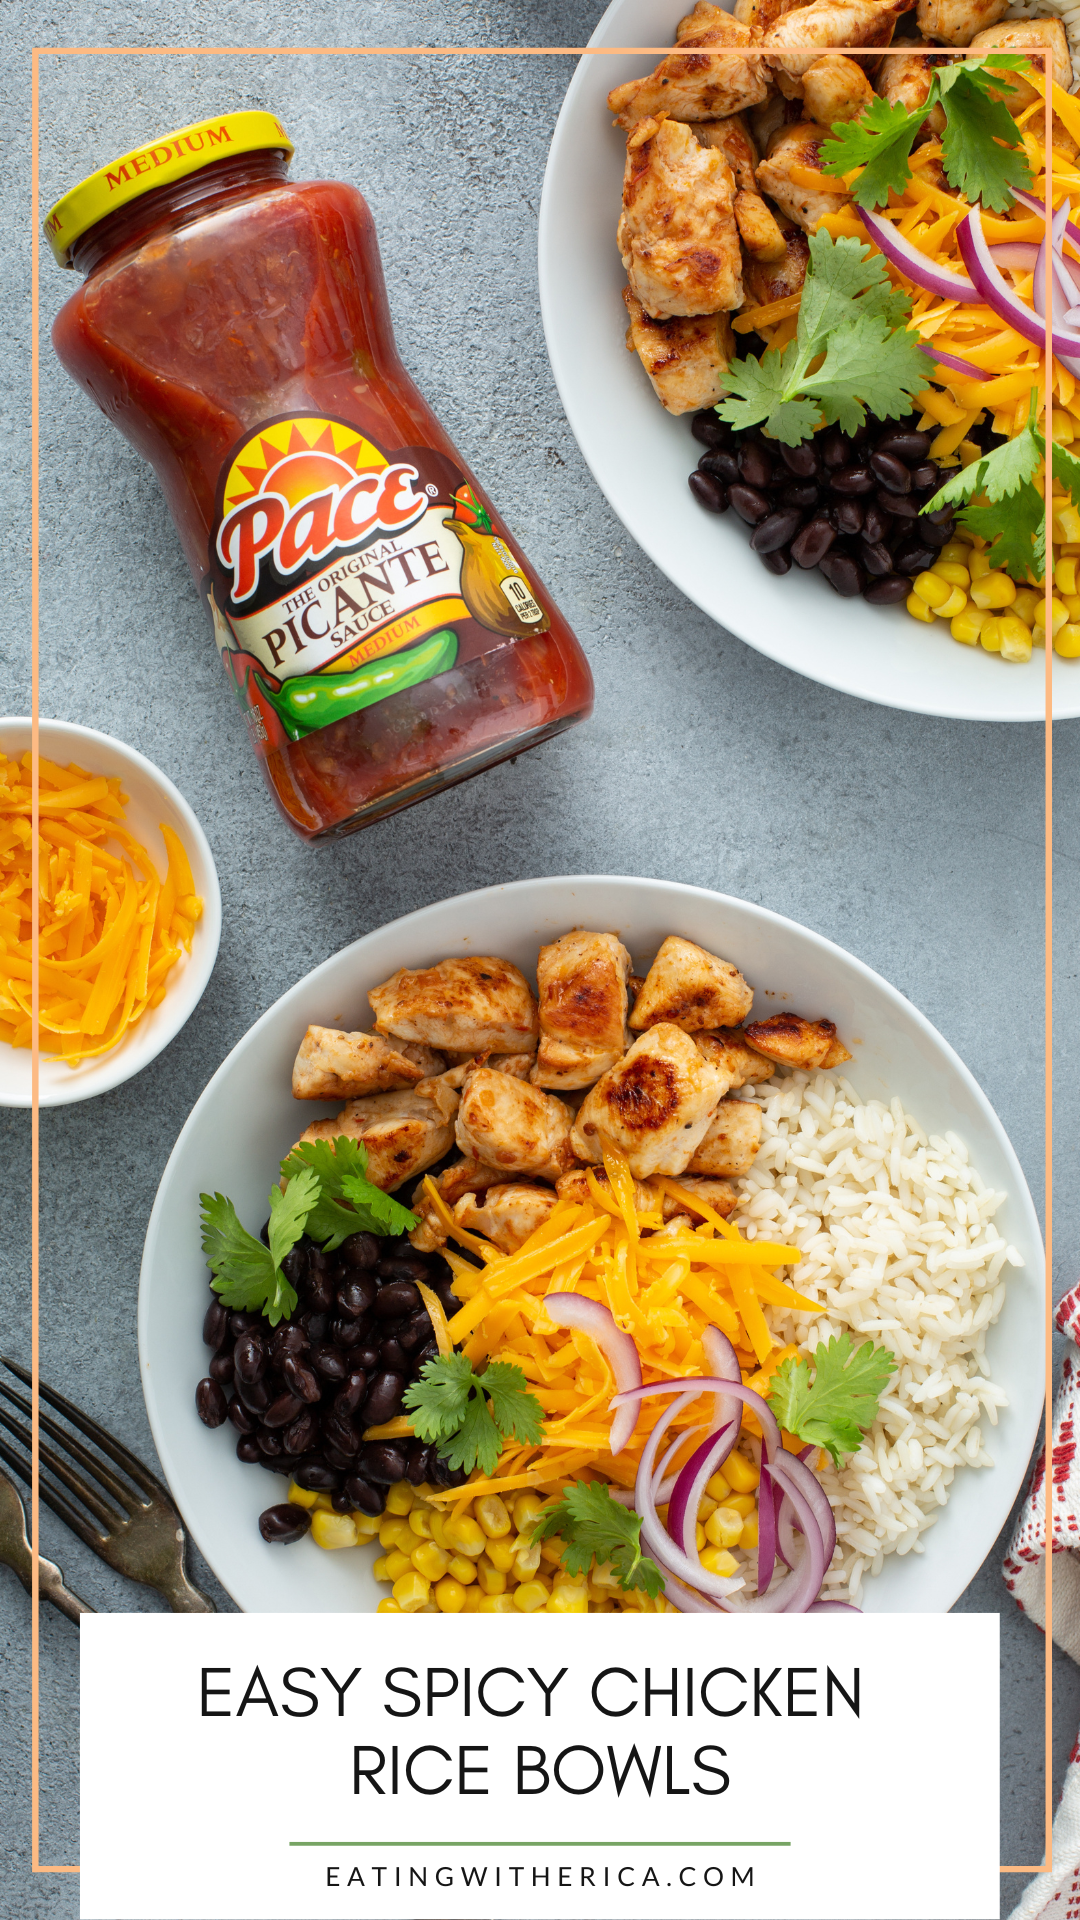 These Easy Spicy Chicken Rice Bowls are the perfect meal to make during the week and pack the next day for leftover. CLICK HERE to see how to make them!